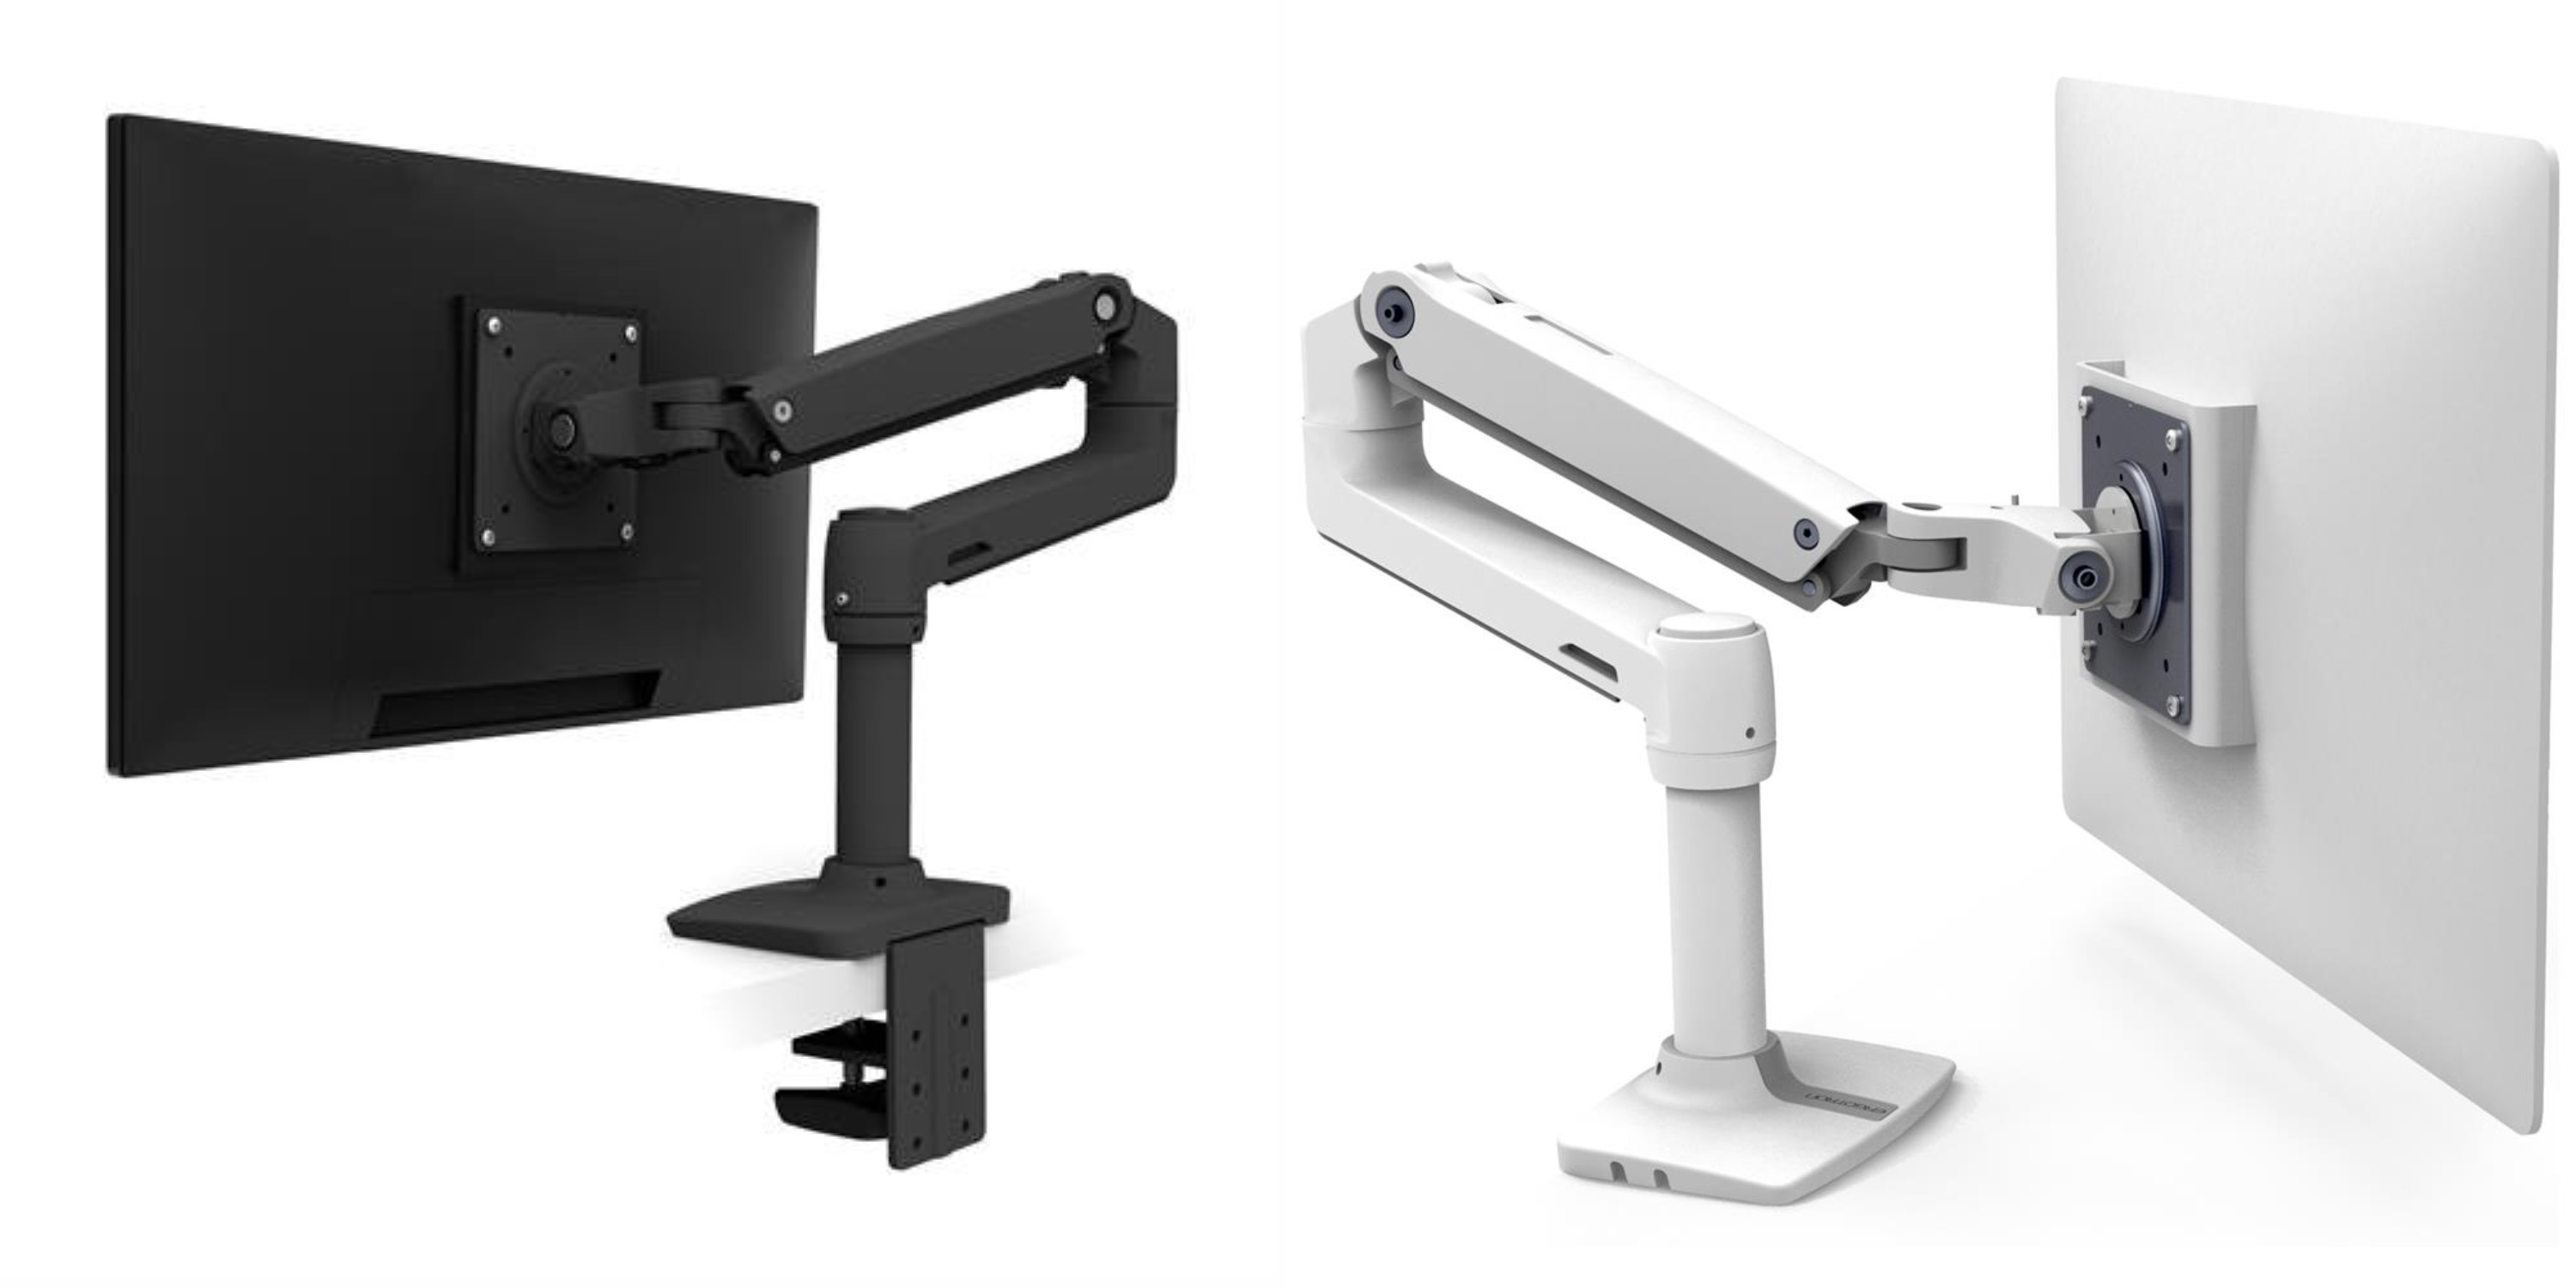 Best monitor arms for Mac and PC external displays – Ergotron LX